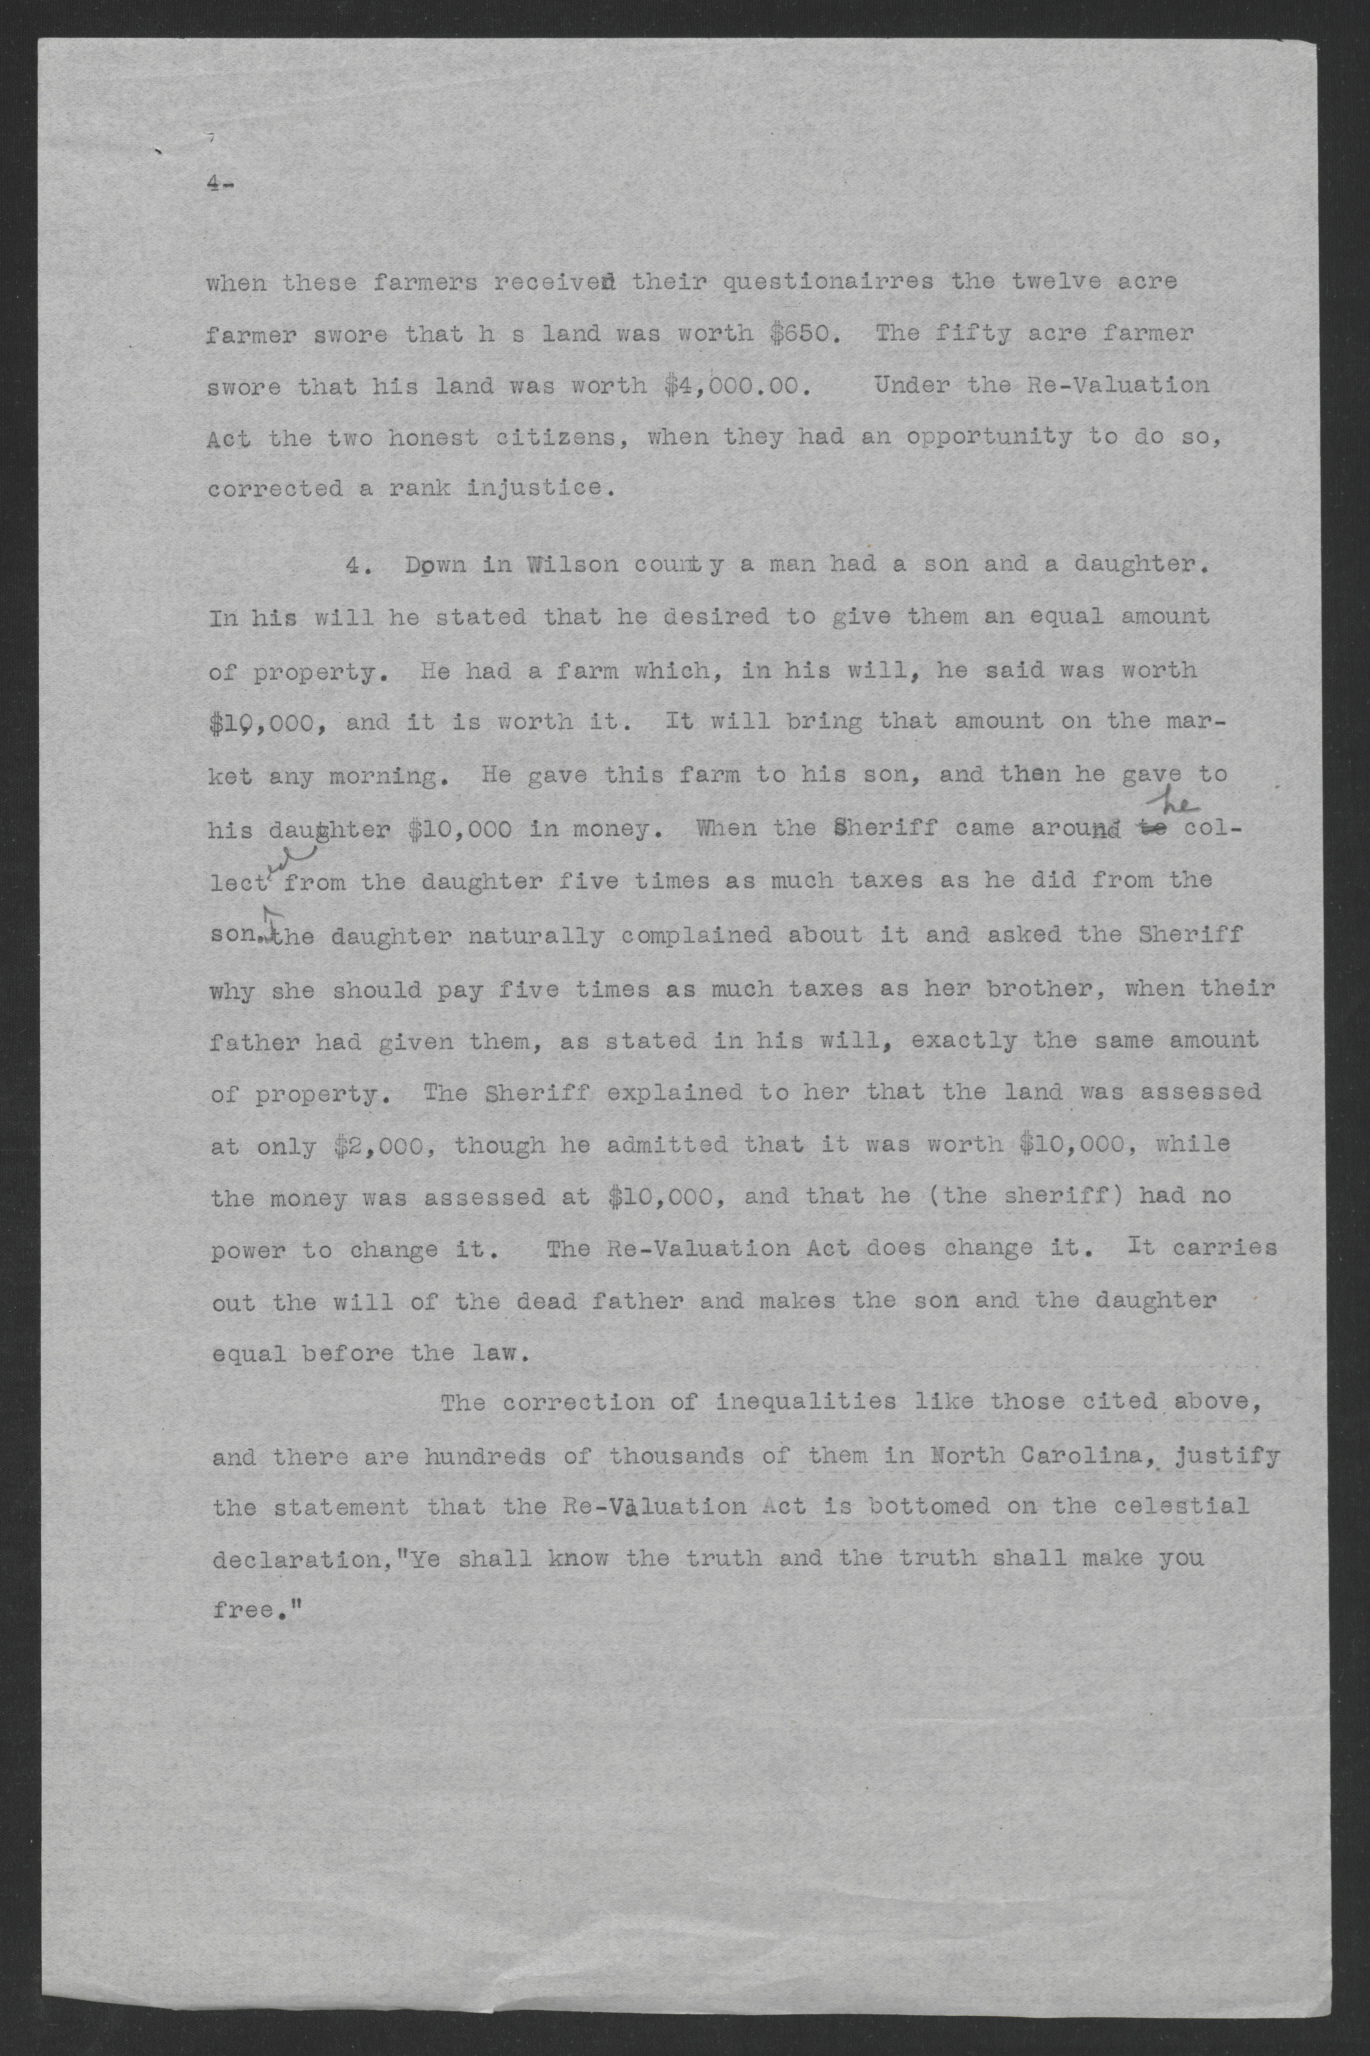 Press Statement by Thomas W. Bickett on the Revaluation Act, February 23, 1920, page 4